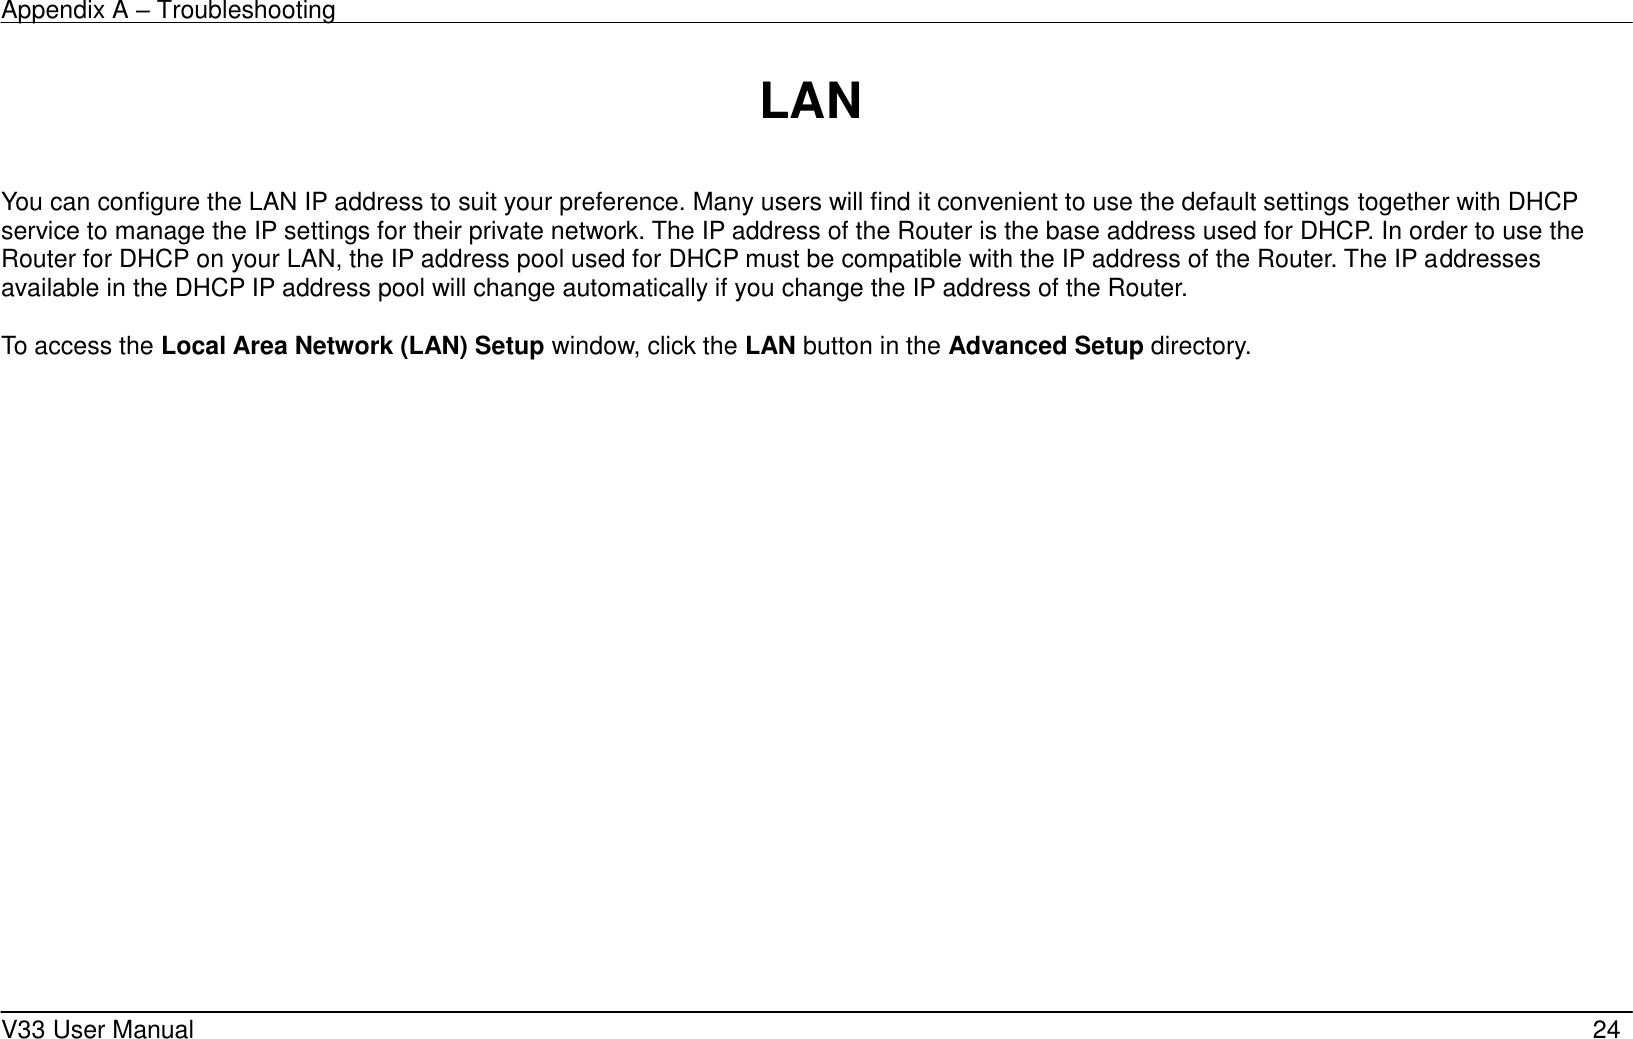 Appendix A – Troubleshooting    V33 User Manual   24  LAN  You can configure the LAN IP address to suit your preference. Many users will find it convenient to use the default settings together with DHCP service to manage the IP settings for their private network. The IP address of the Router is the base address used for DHCP. In order to use the Router for DHCP on your LAN, the IP address pool used for DHCP must be compatible with the IP address of the Router. The IP addresses available in the DHCP IP address pool will change automatically if you change the IP address of the Router.      To access the Local Area Network (LAN) Setup window, click the LAN button in the Advanced Setup directory.  